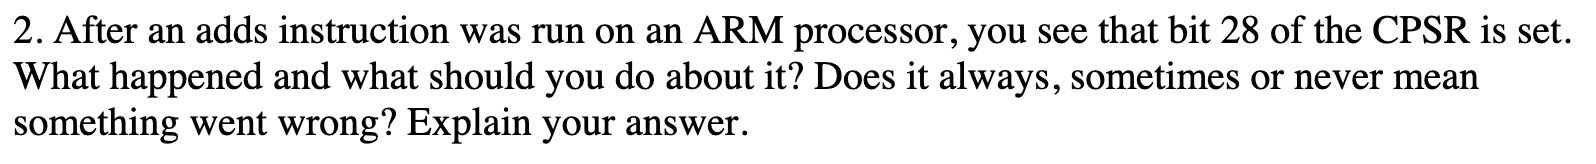 2. After an adds instruction was run on an ARM processor, you see that bit 28 of the CPSR is set.
What happened and what should you do about it? Does it always, sometimes or never mean
something went wrong? Explain your answer.
